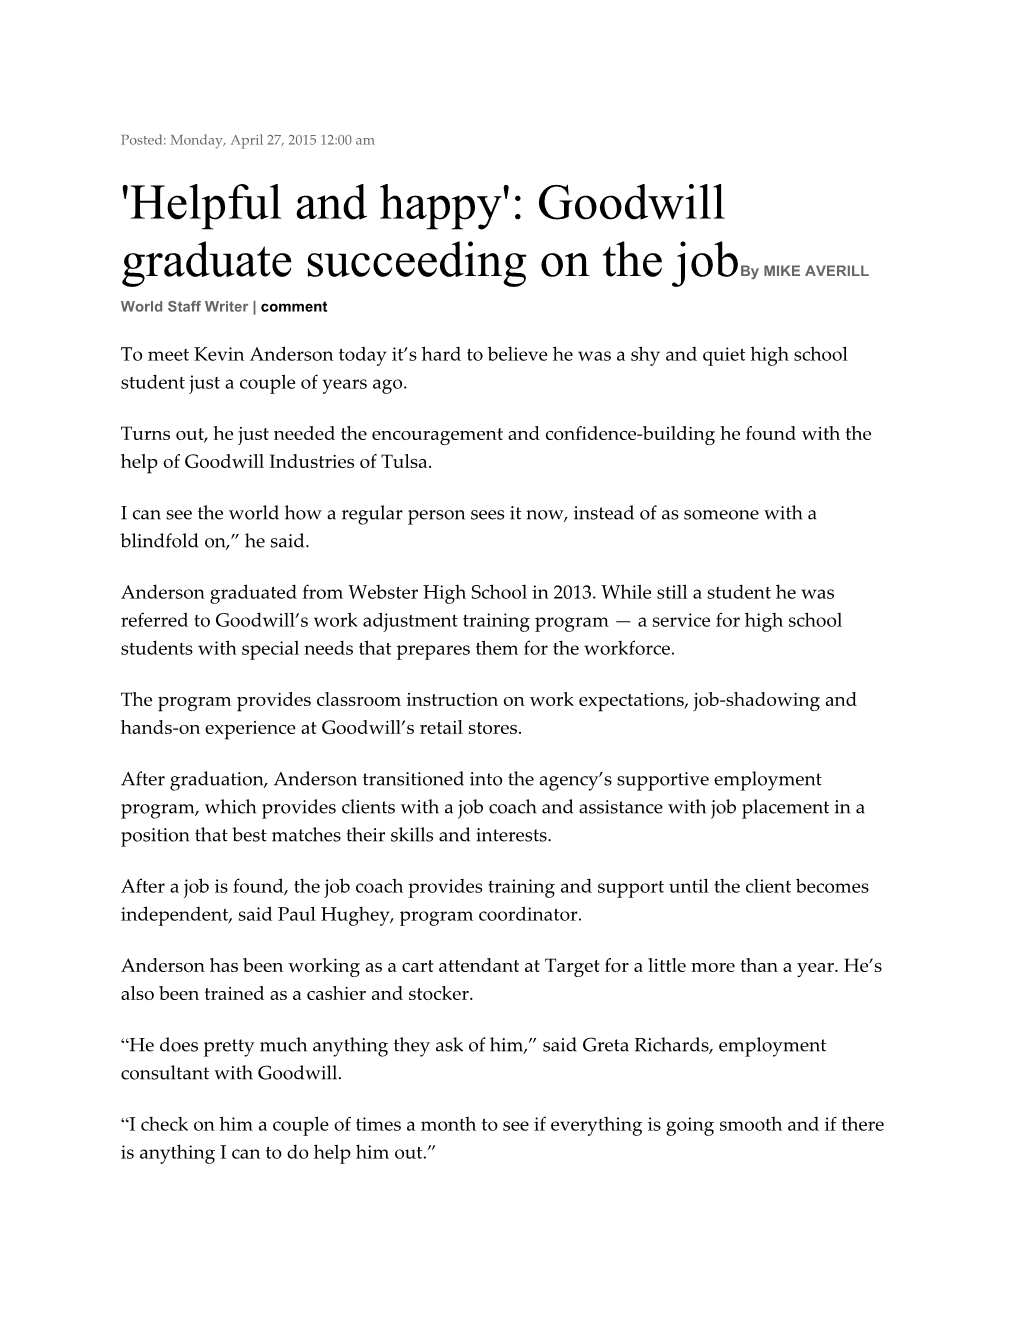 'Helpful and Happy': Goodwill Graduate Succeeding on the Job by MIKE AVERILL World Staff